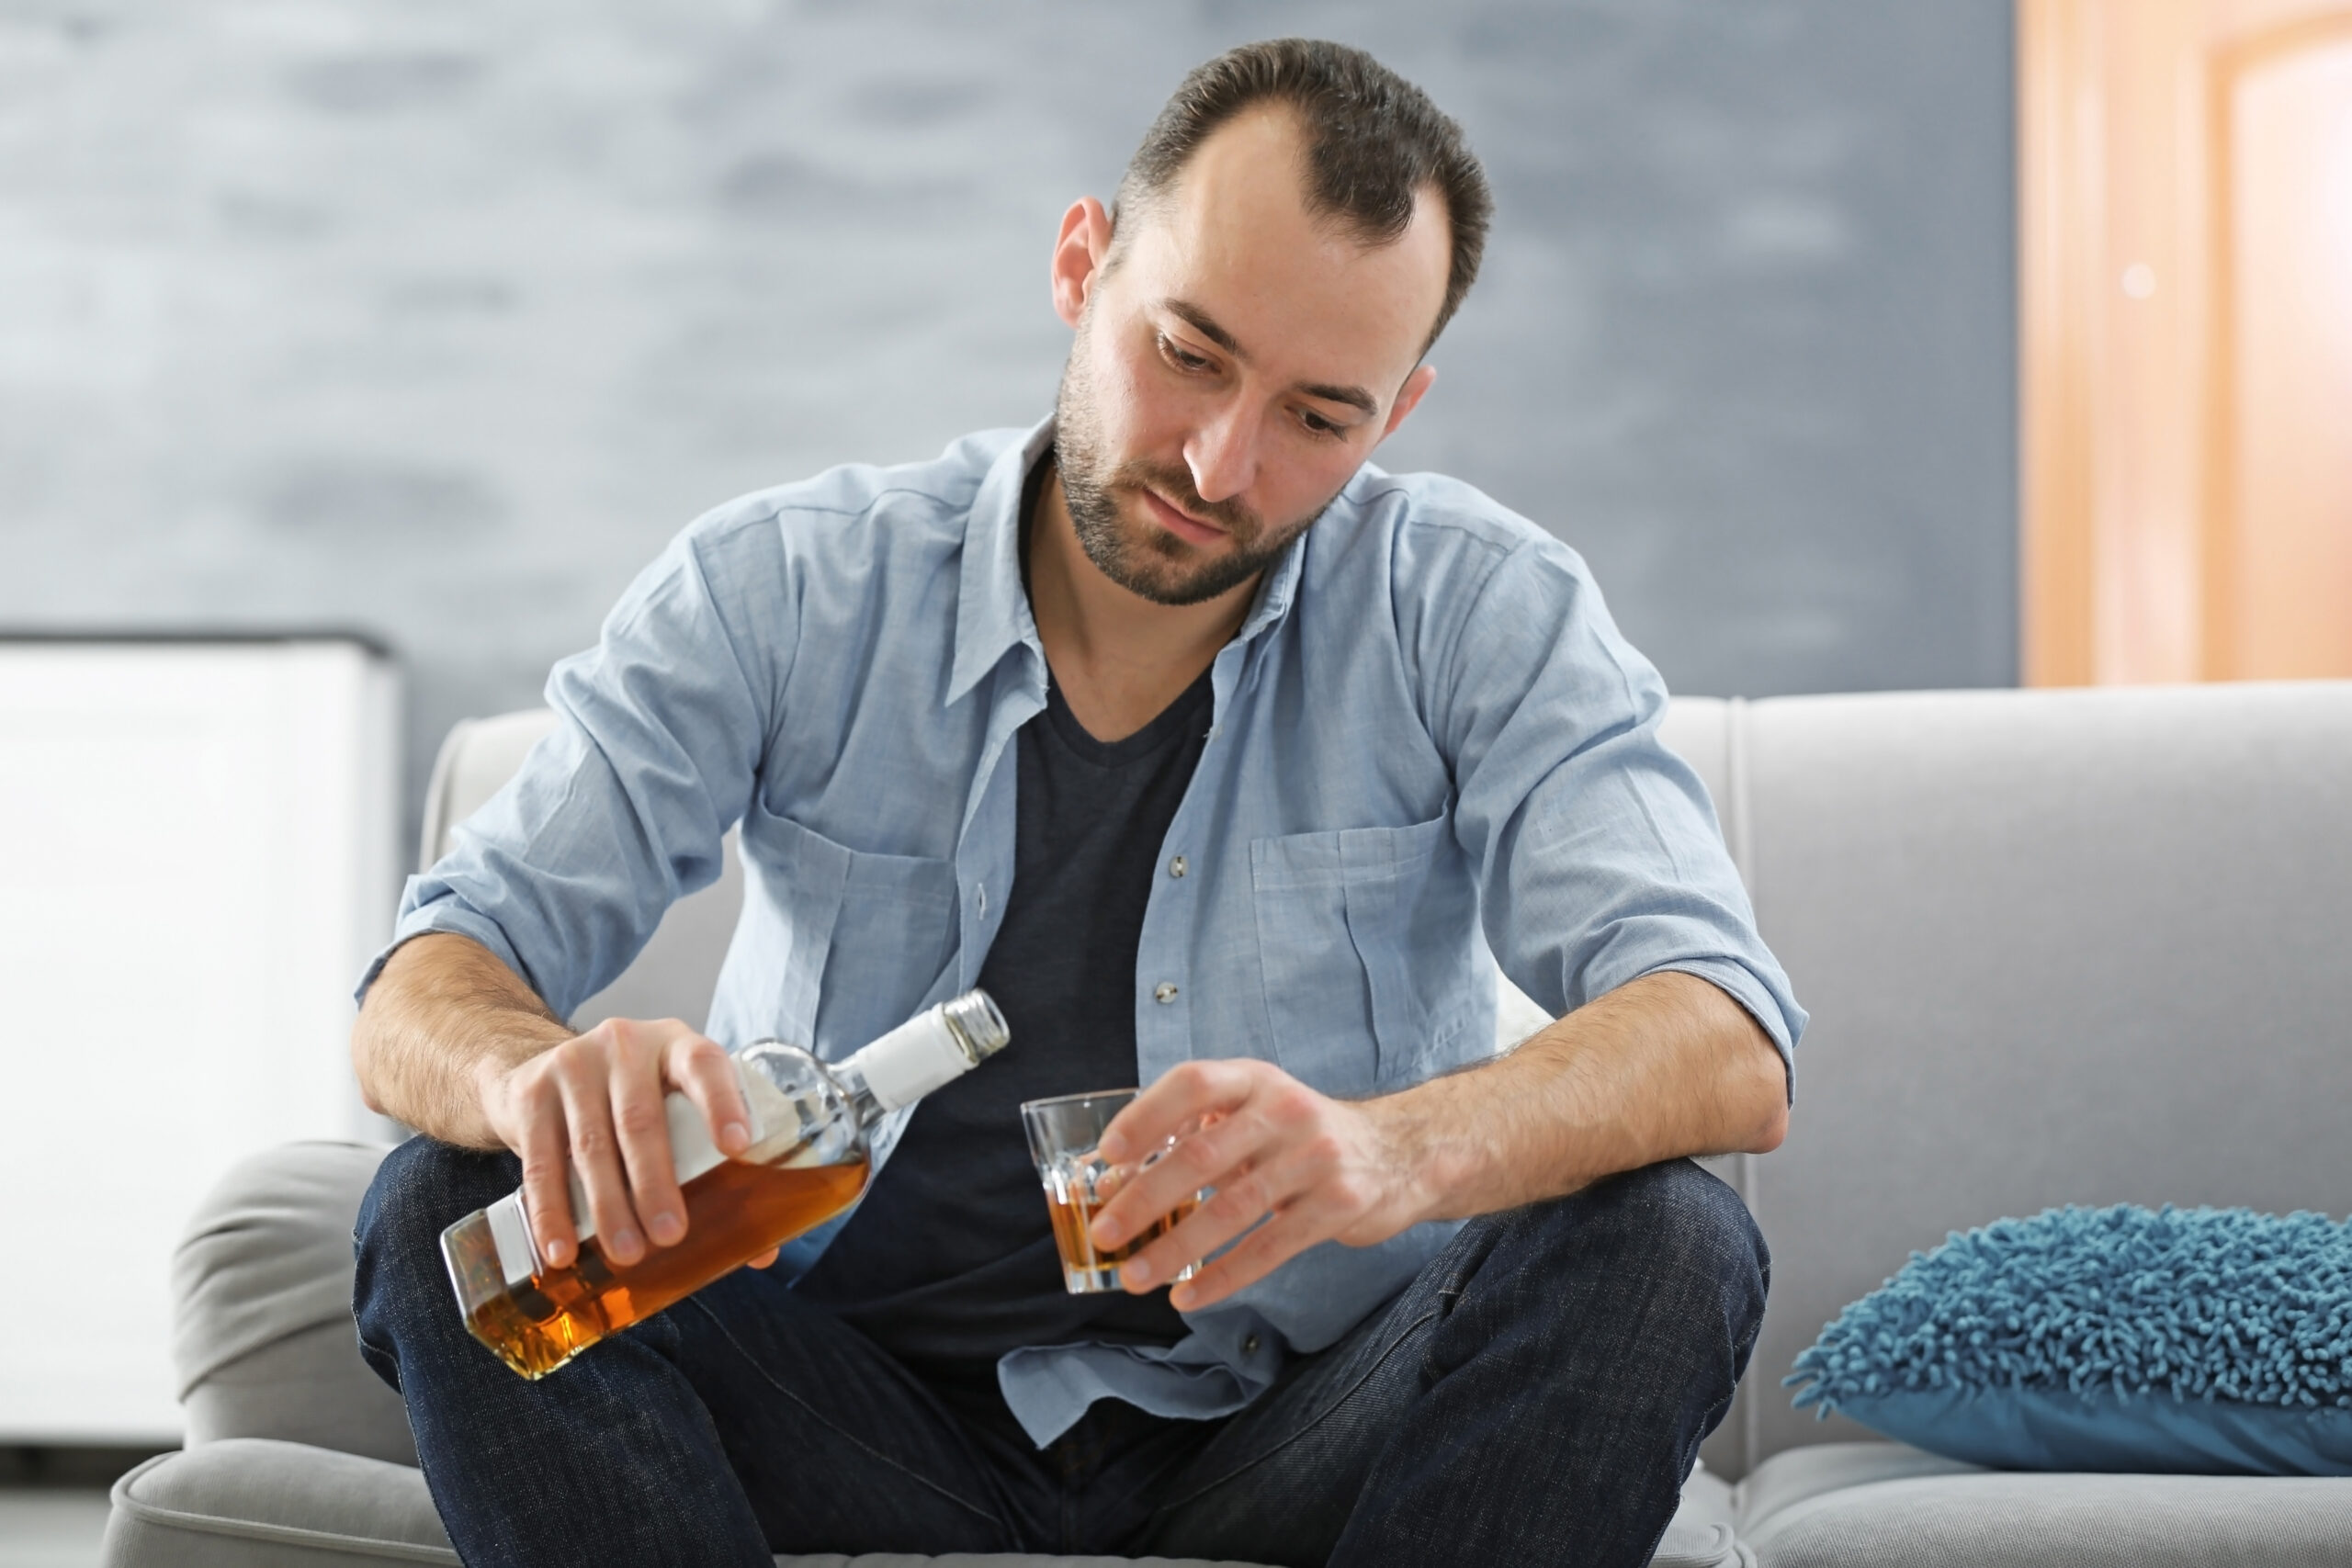 How long is alcohol rehab?